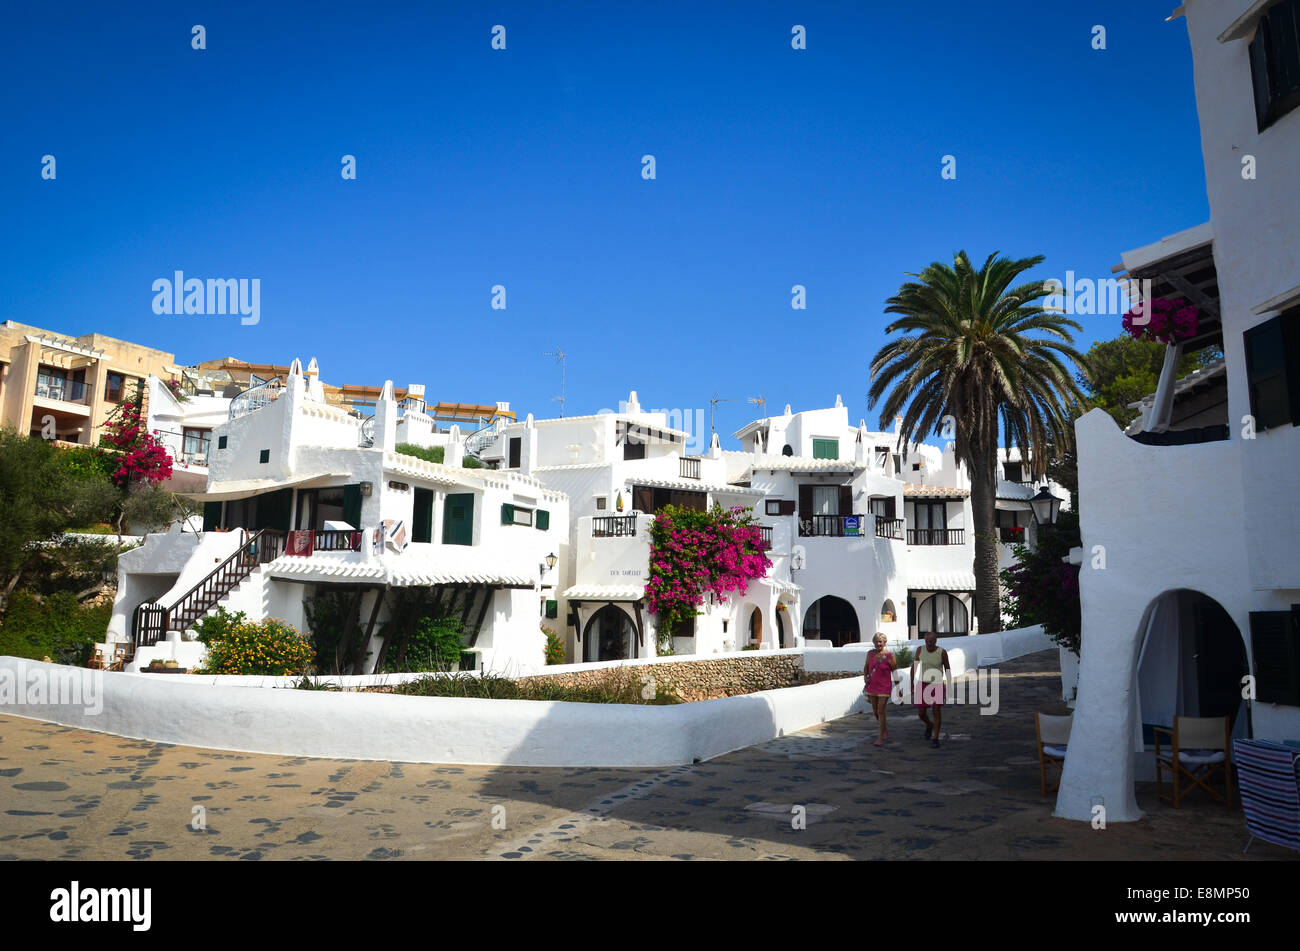 The traditional small white buildings in the town of Binibequer Vell, on the Spanish island of Menorca, in the Mediterranean sea Stock Photo